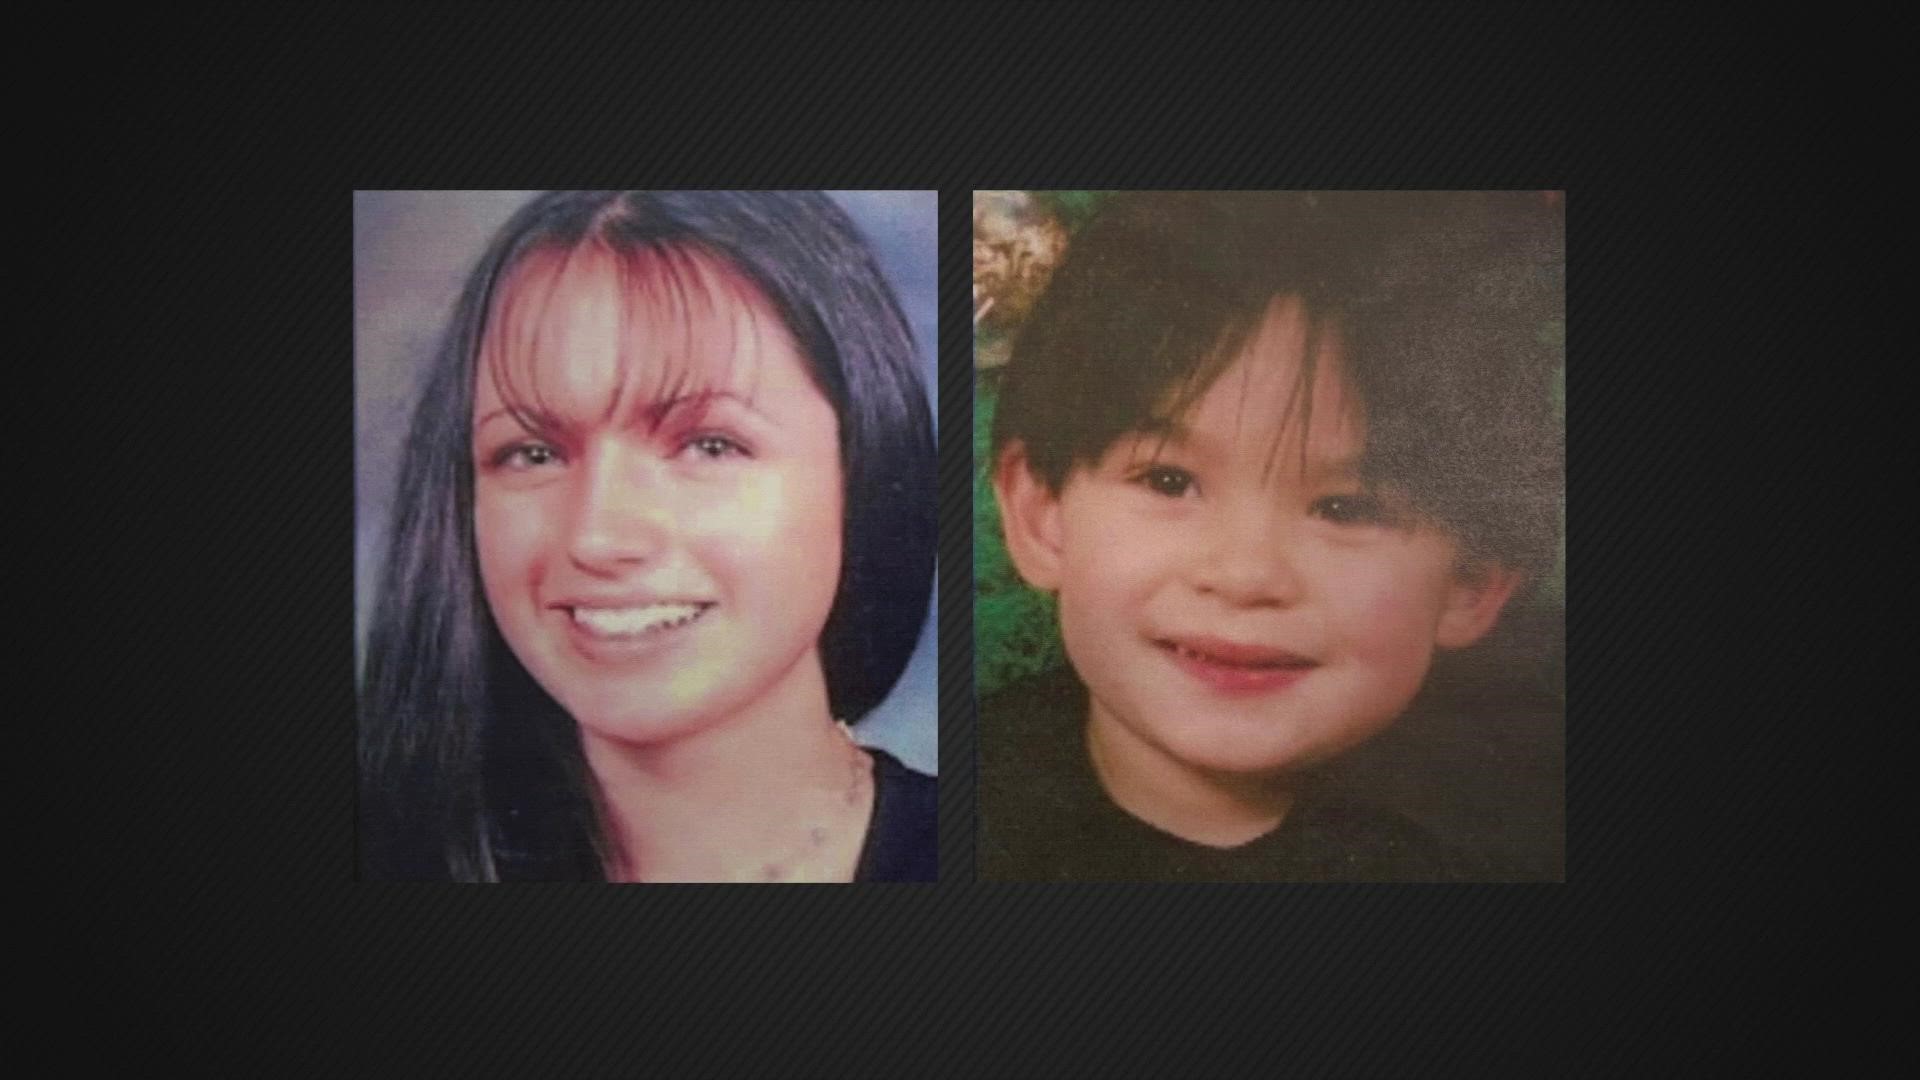 Five-year-old Jeremy Britt-Bayinthavong and 19-year-old Kimberly Riley were both killed when a shooter sprayed bullets into a south-end Tacoma home in 2002.